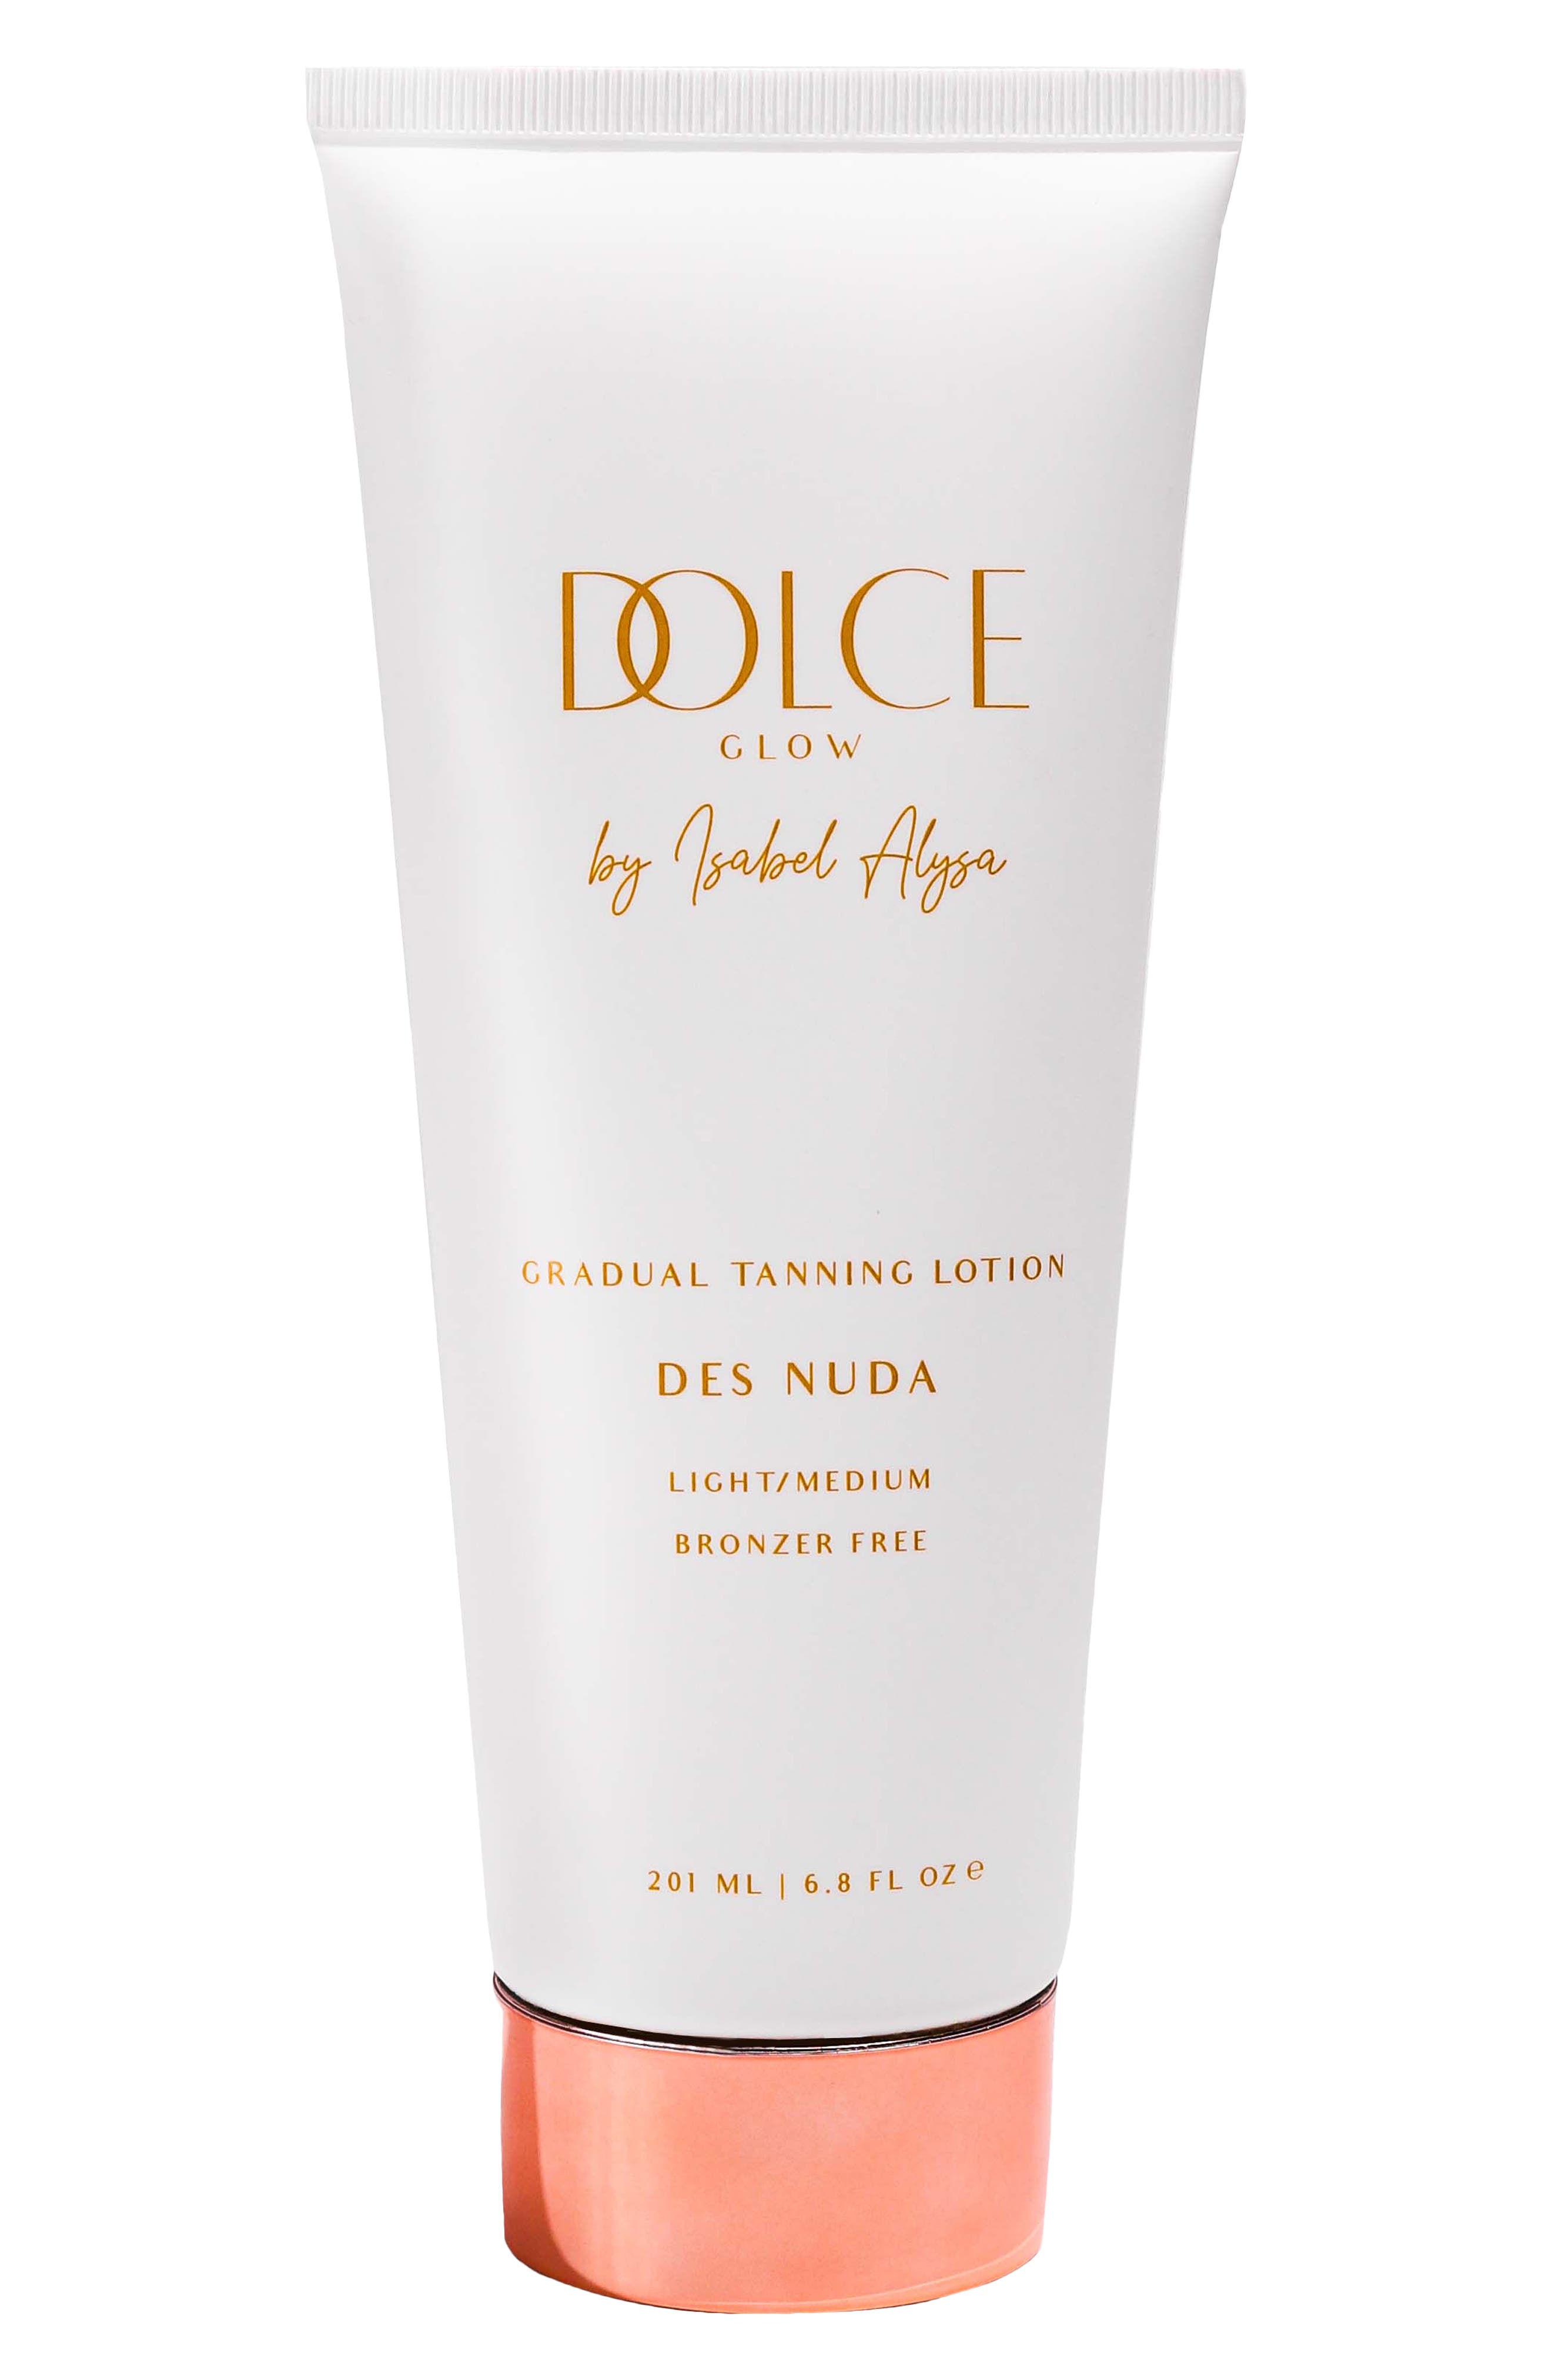 Dolce Glow by Isabel Alysa Des Nuda Gradual Tanning Lotion in None at Nordstrom